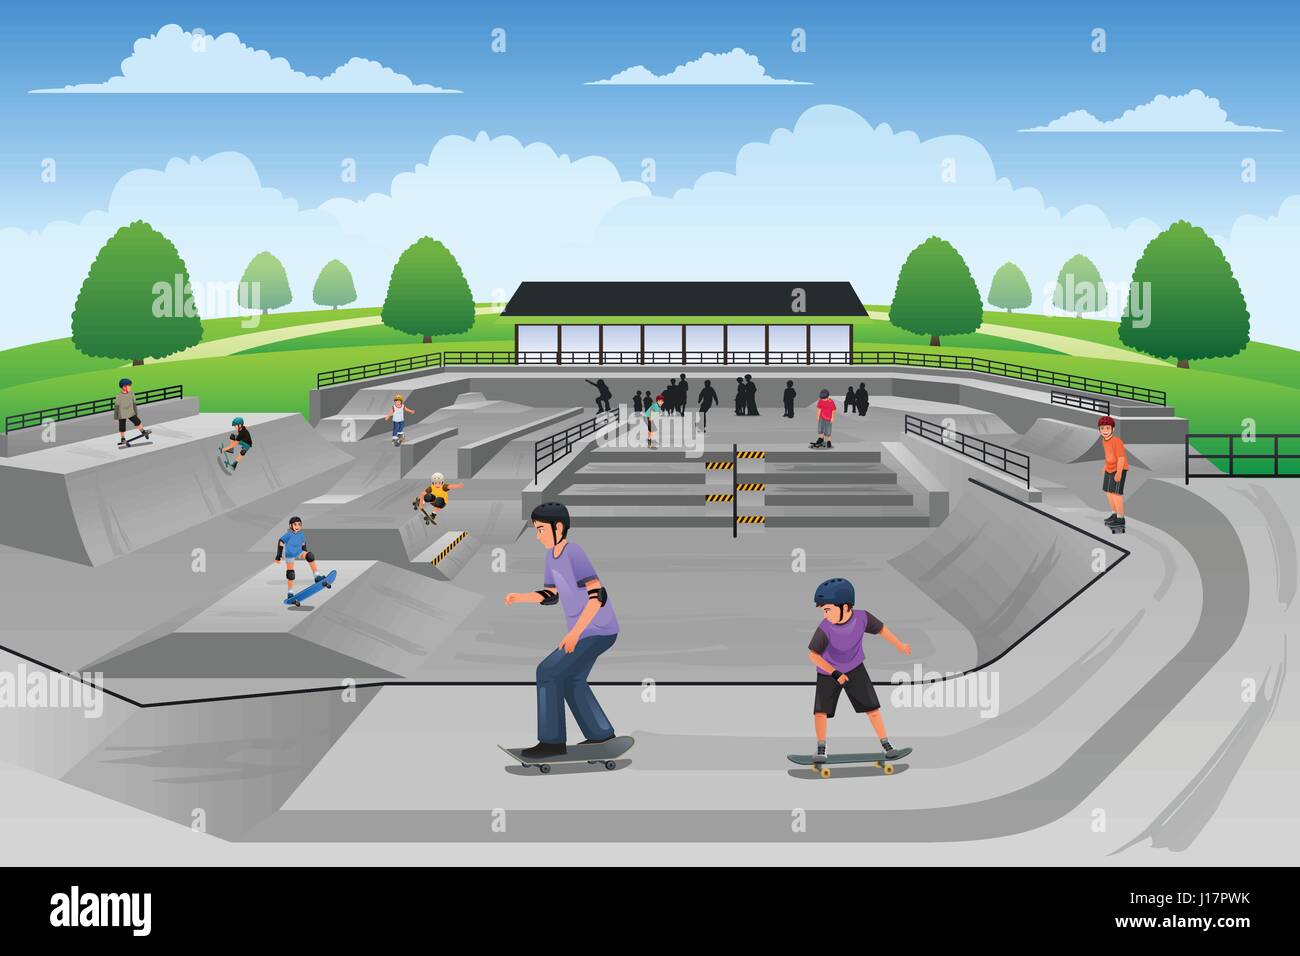 A vector illustration of people playing skateboard in a skate park Stock Vector